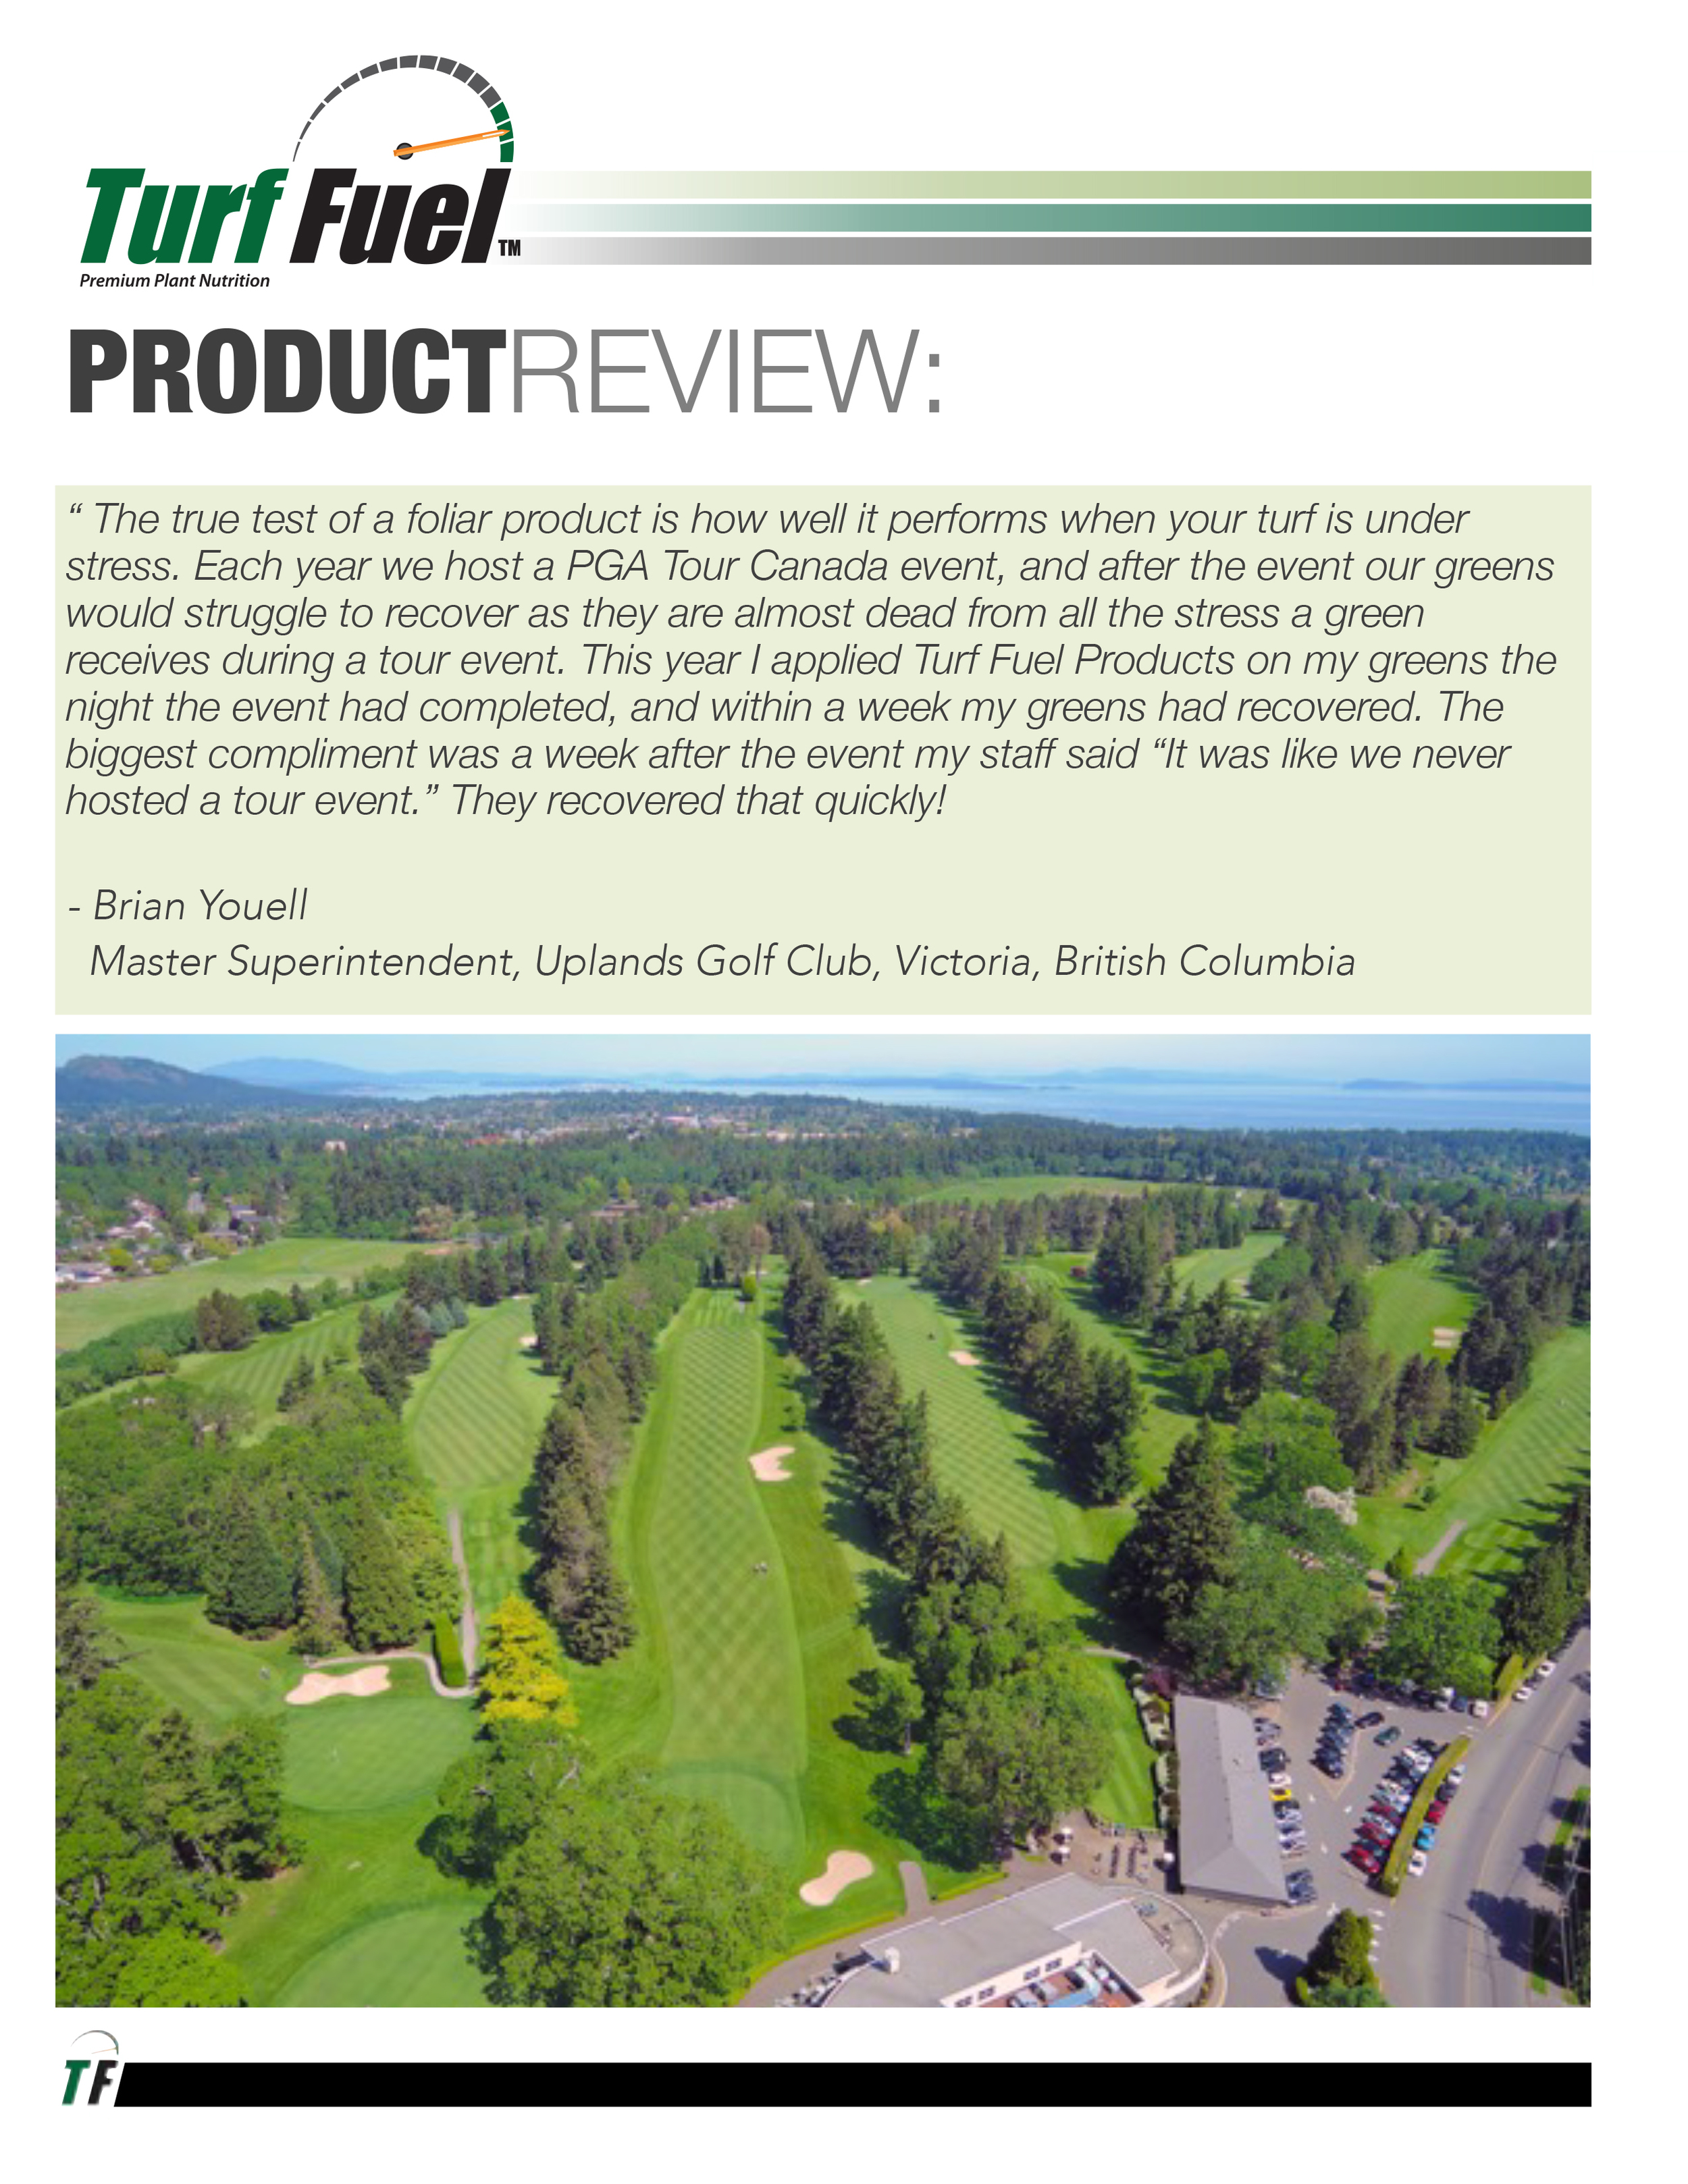 PRODUCT REVIEW Uplands GC